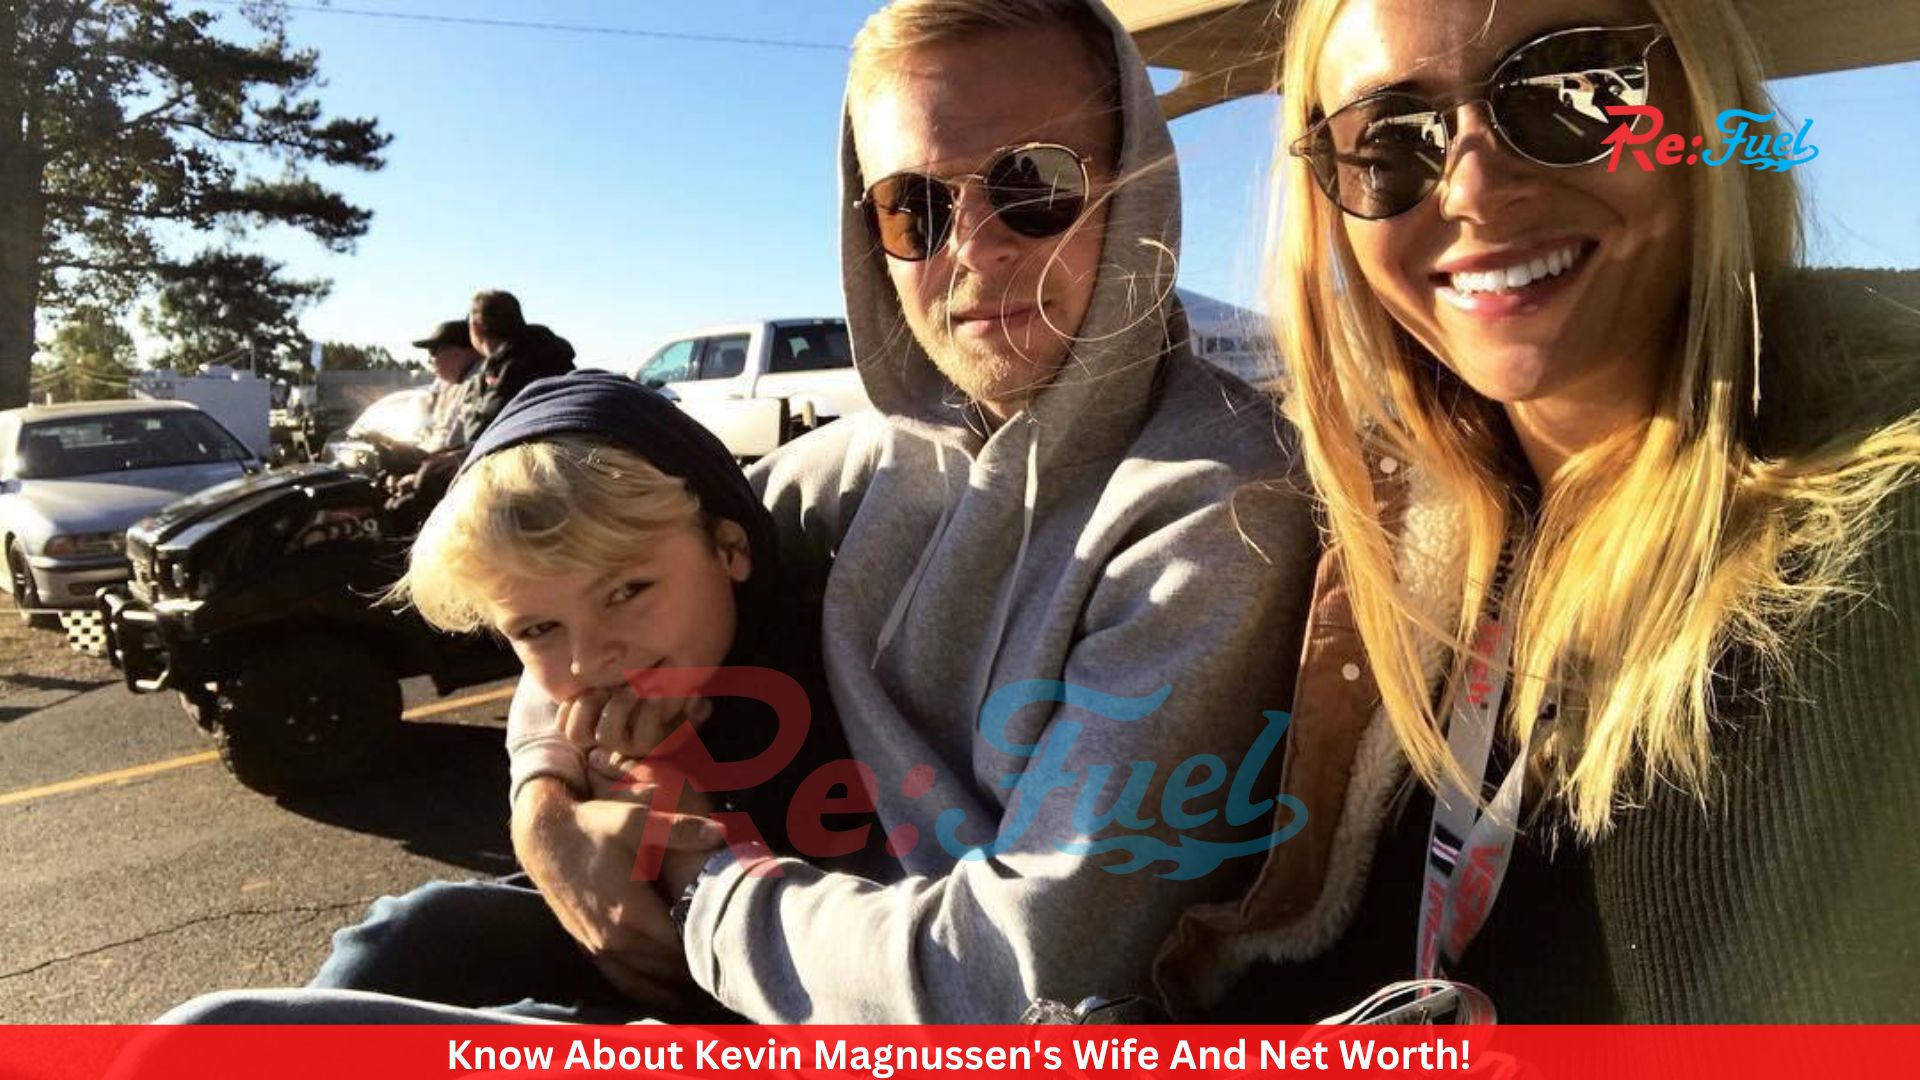 Know About Kevin Magnussen's Wife And Net Worth!